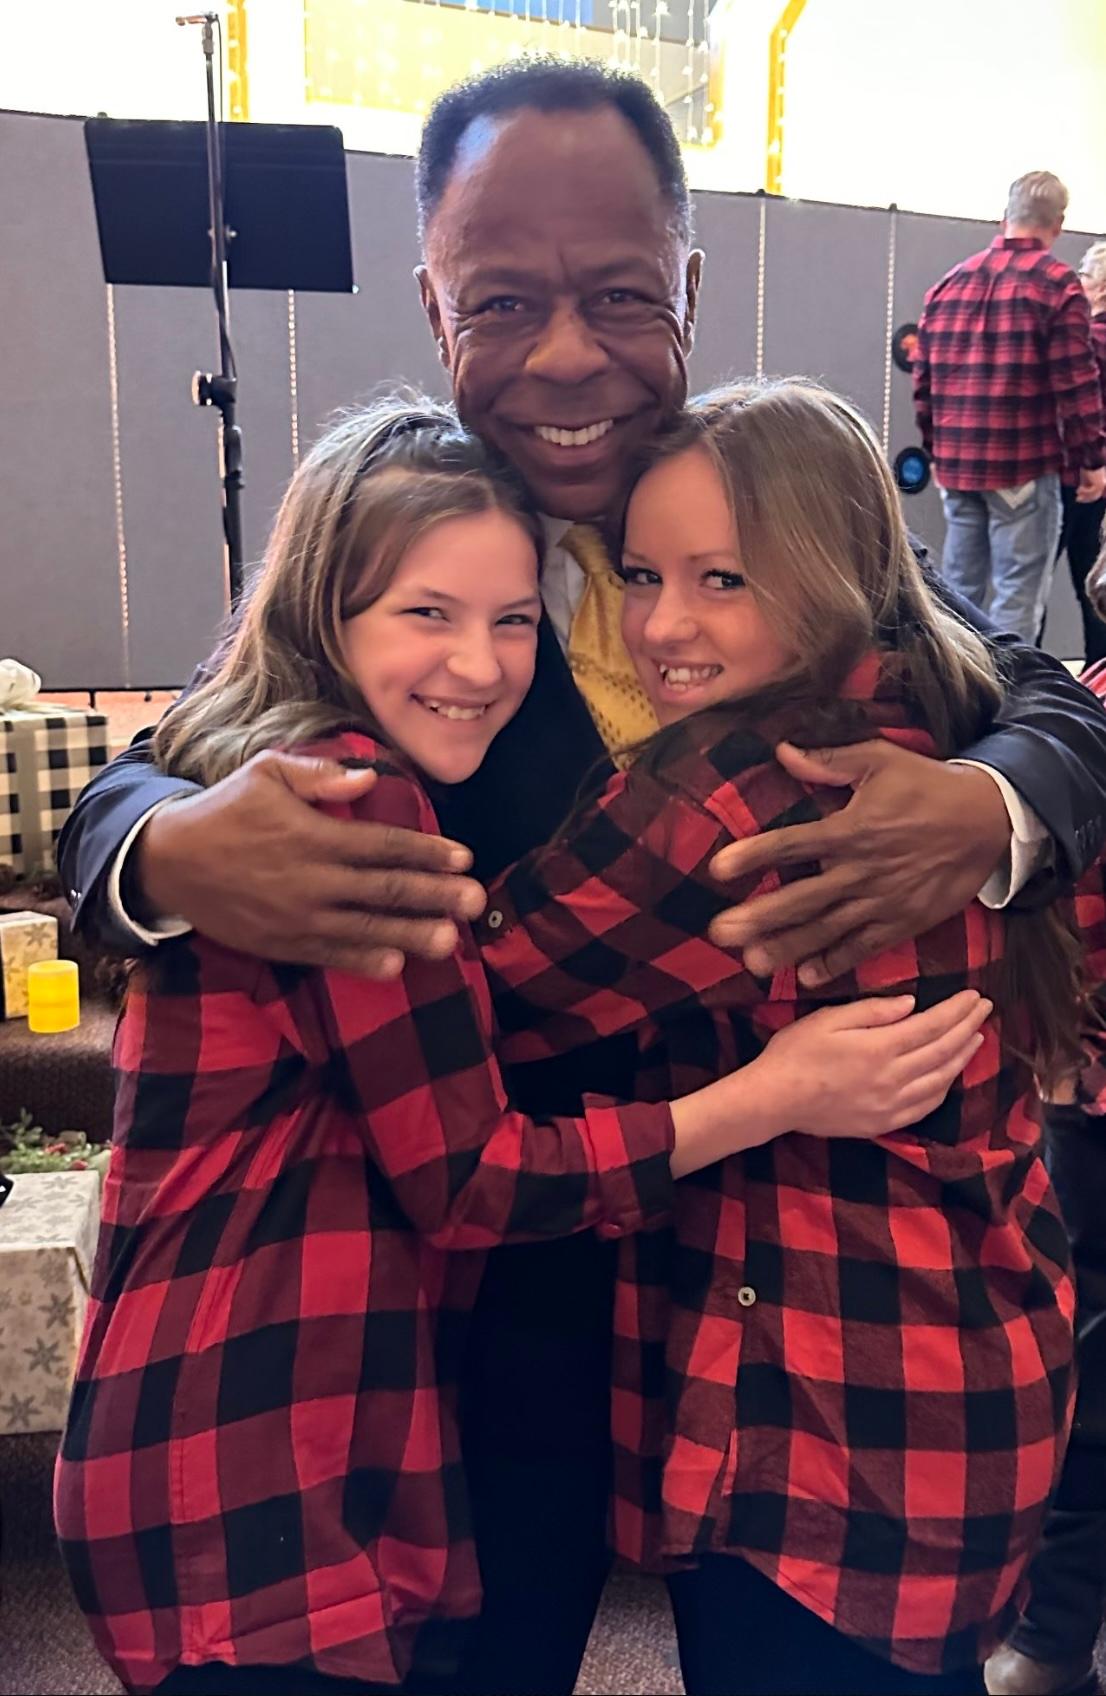 Leo Terrell, a Democrat who became a supporter of former President Donald Trump, a Republican, poses with Isabelah Krachenfels, 13, (L) and her sister, Alaycia, 16, at their church, Soteria Des Moines, on Dec. 10, 2023. (Courtesy of Leo Terrell)